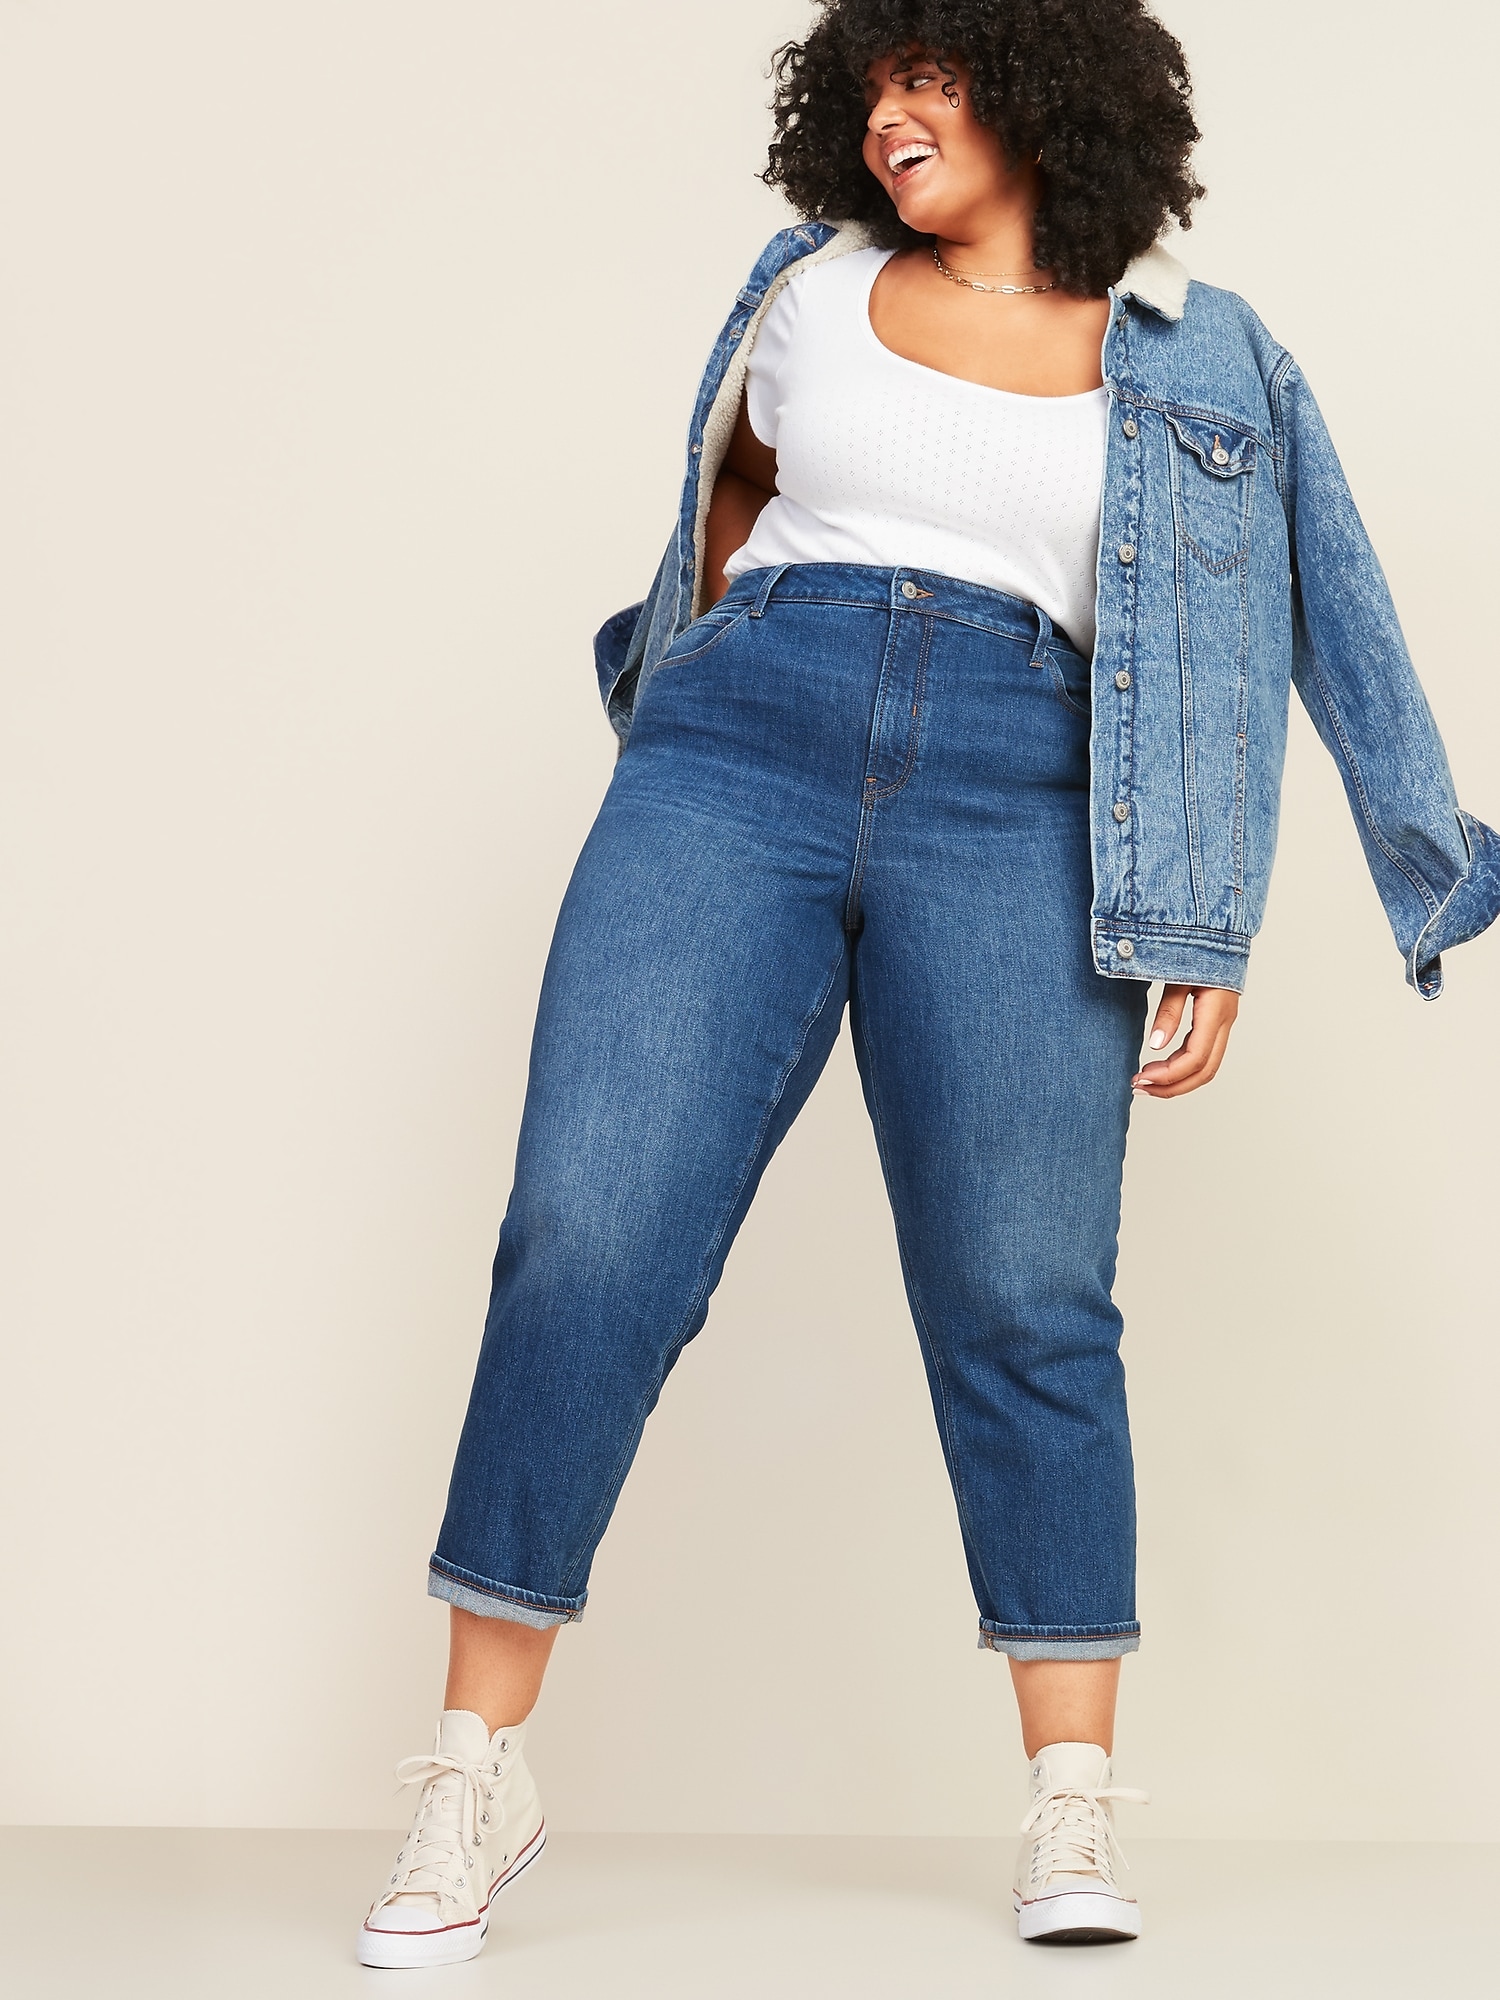 How to Measure the Inseam of Your Plus Size Jeans - Dia & Co